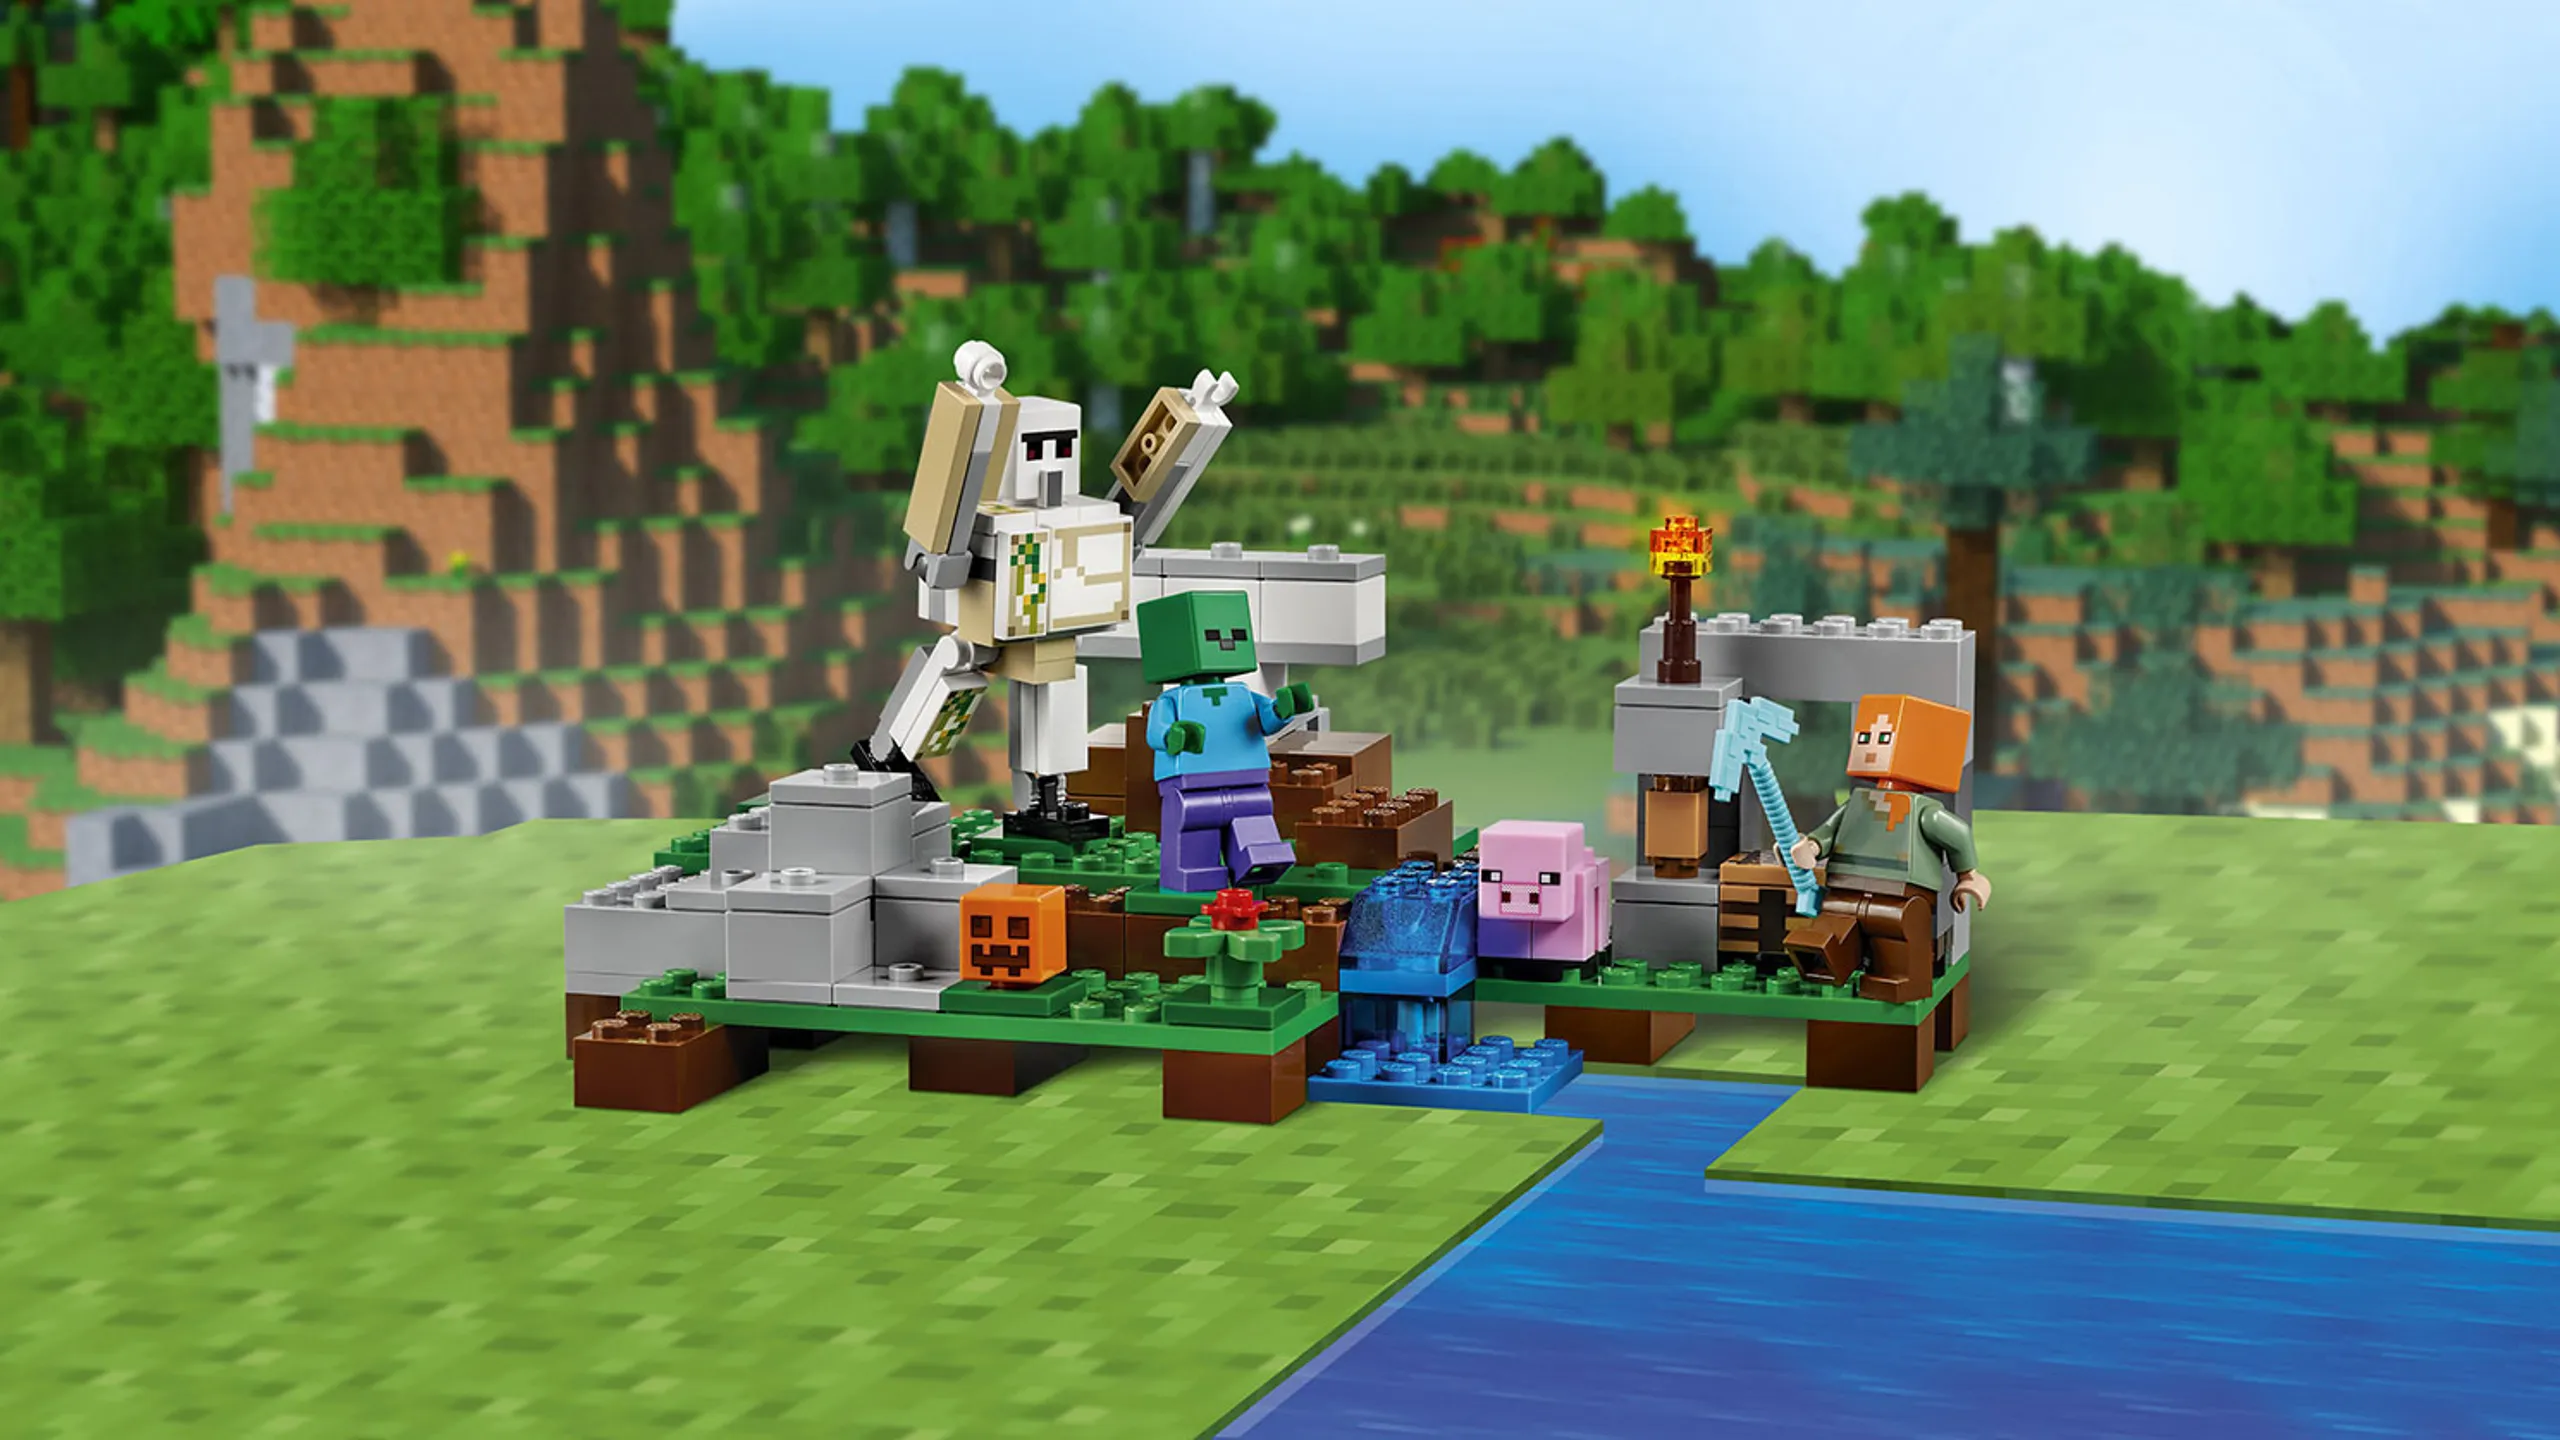 LEGO Minecraft - 21123 The Iron Golem - The iron golem and a zombie crashes the camp where Steve is with his pig and pumpkins.